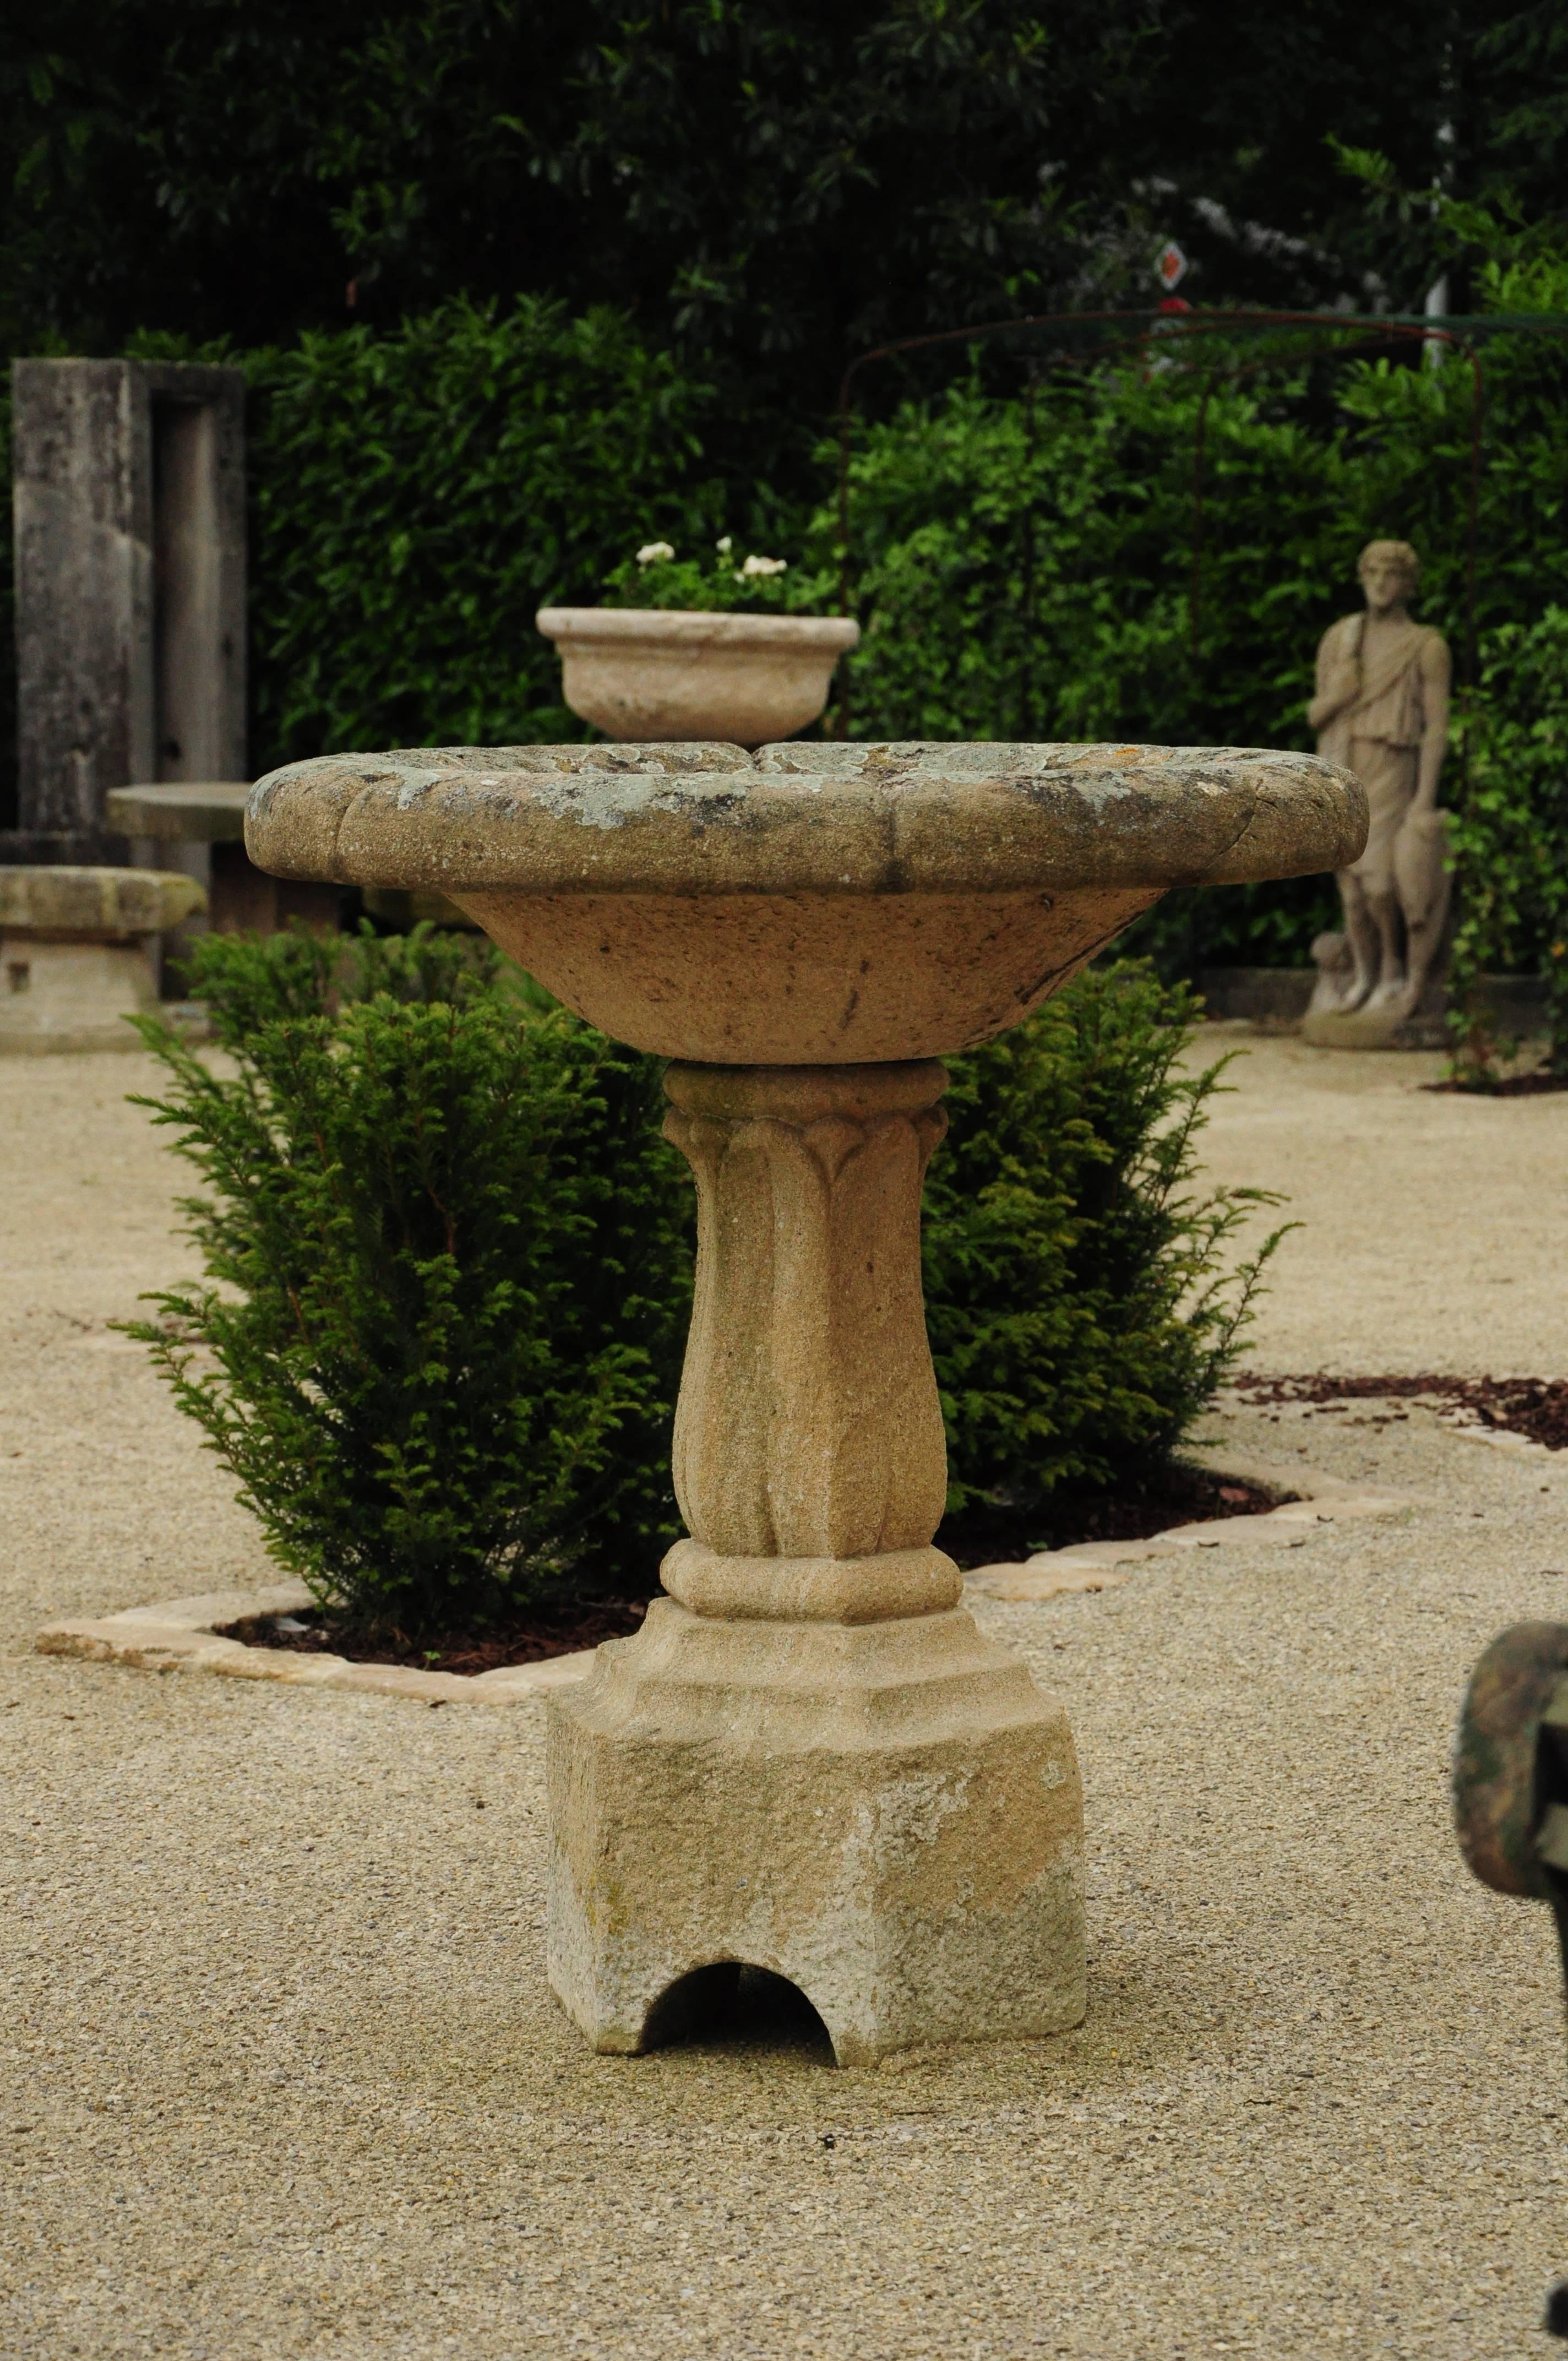 This elegant sandstone fountain was found in France. Its fluent lines and vegetal motives are reminiscent of the early 19th century and in particular the Napoleonic period. His Egyptian campaign was a great inspiration for artists and architects.